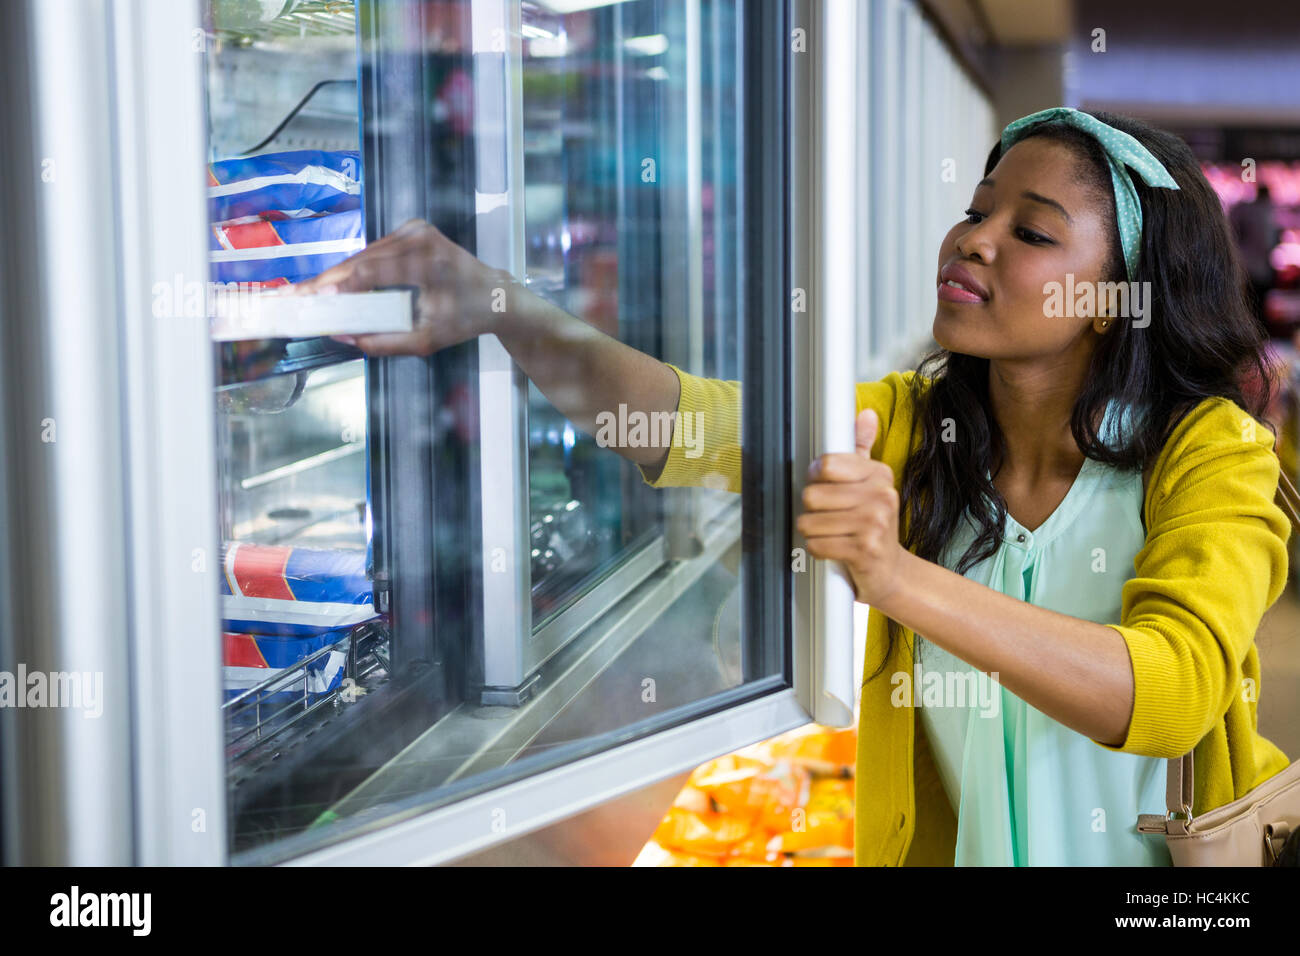 Woman shopping in grocery section Stock Photo